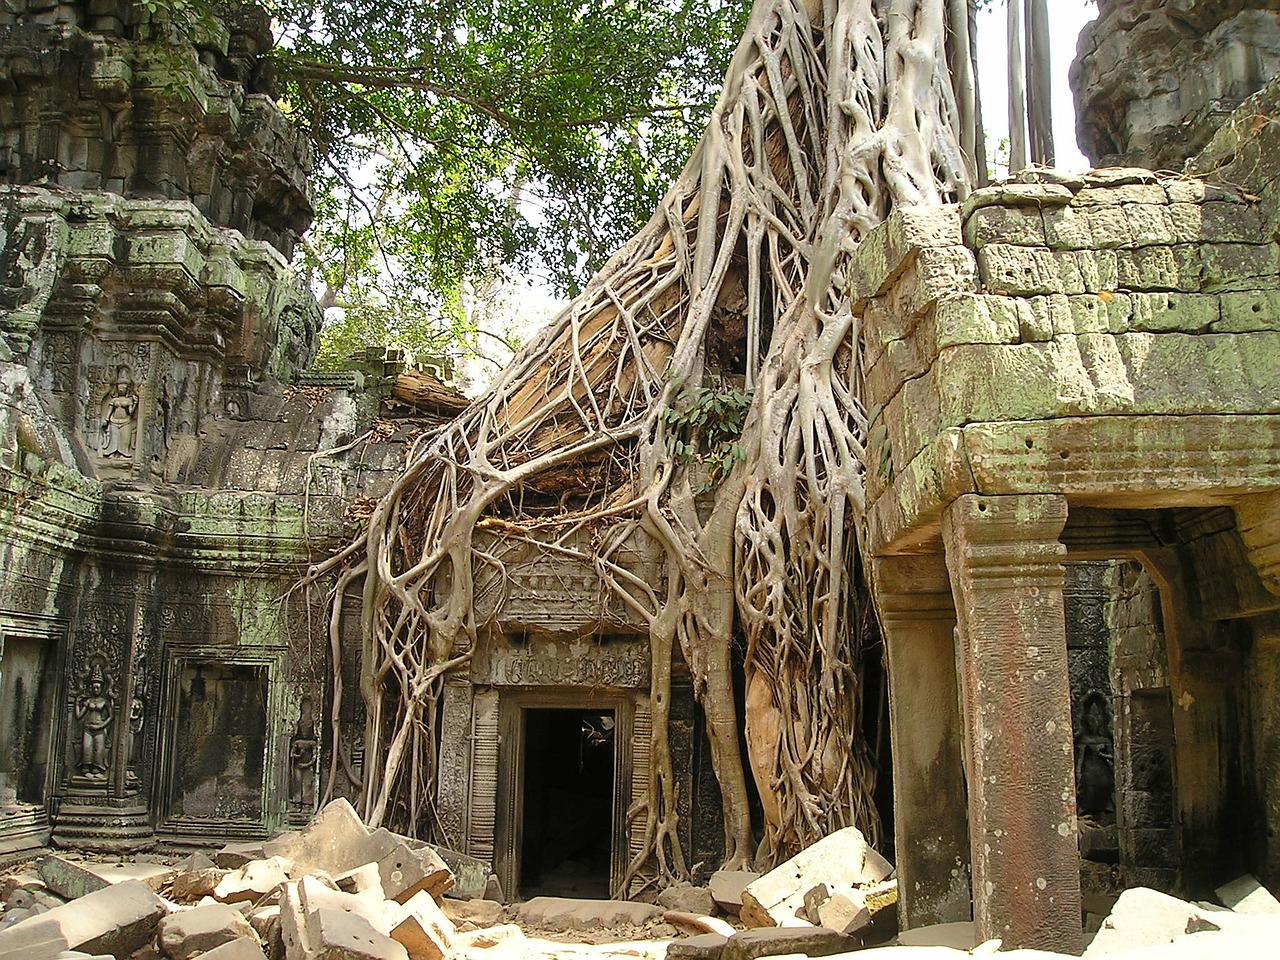 A large tree root encroaches on the temples in Angkor Wat